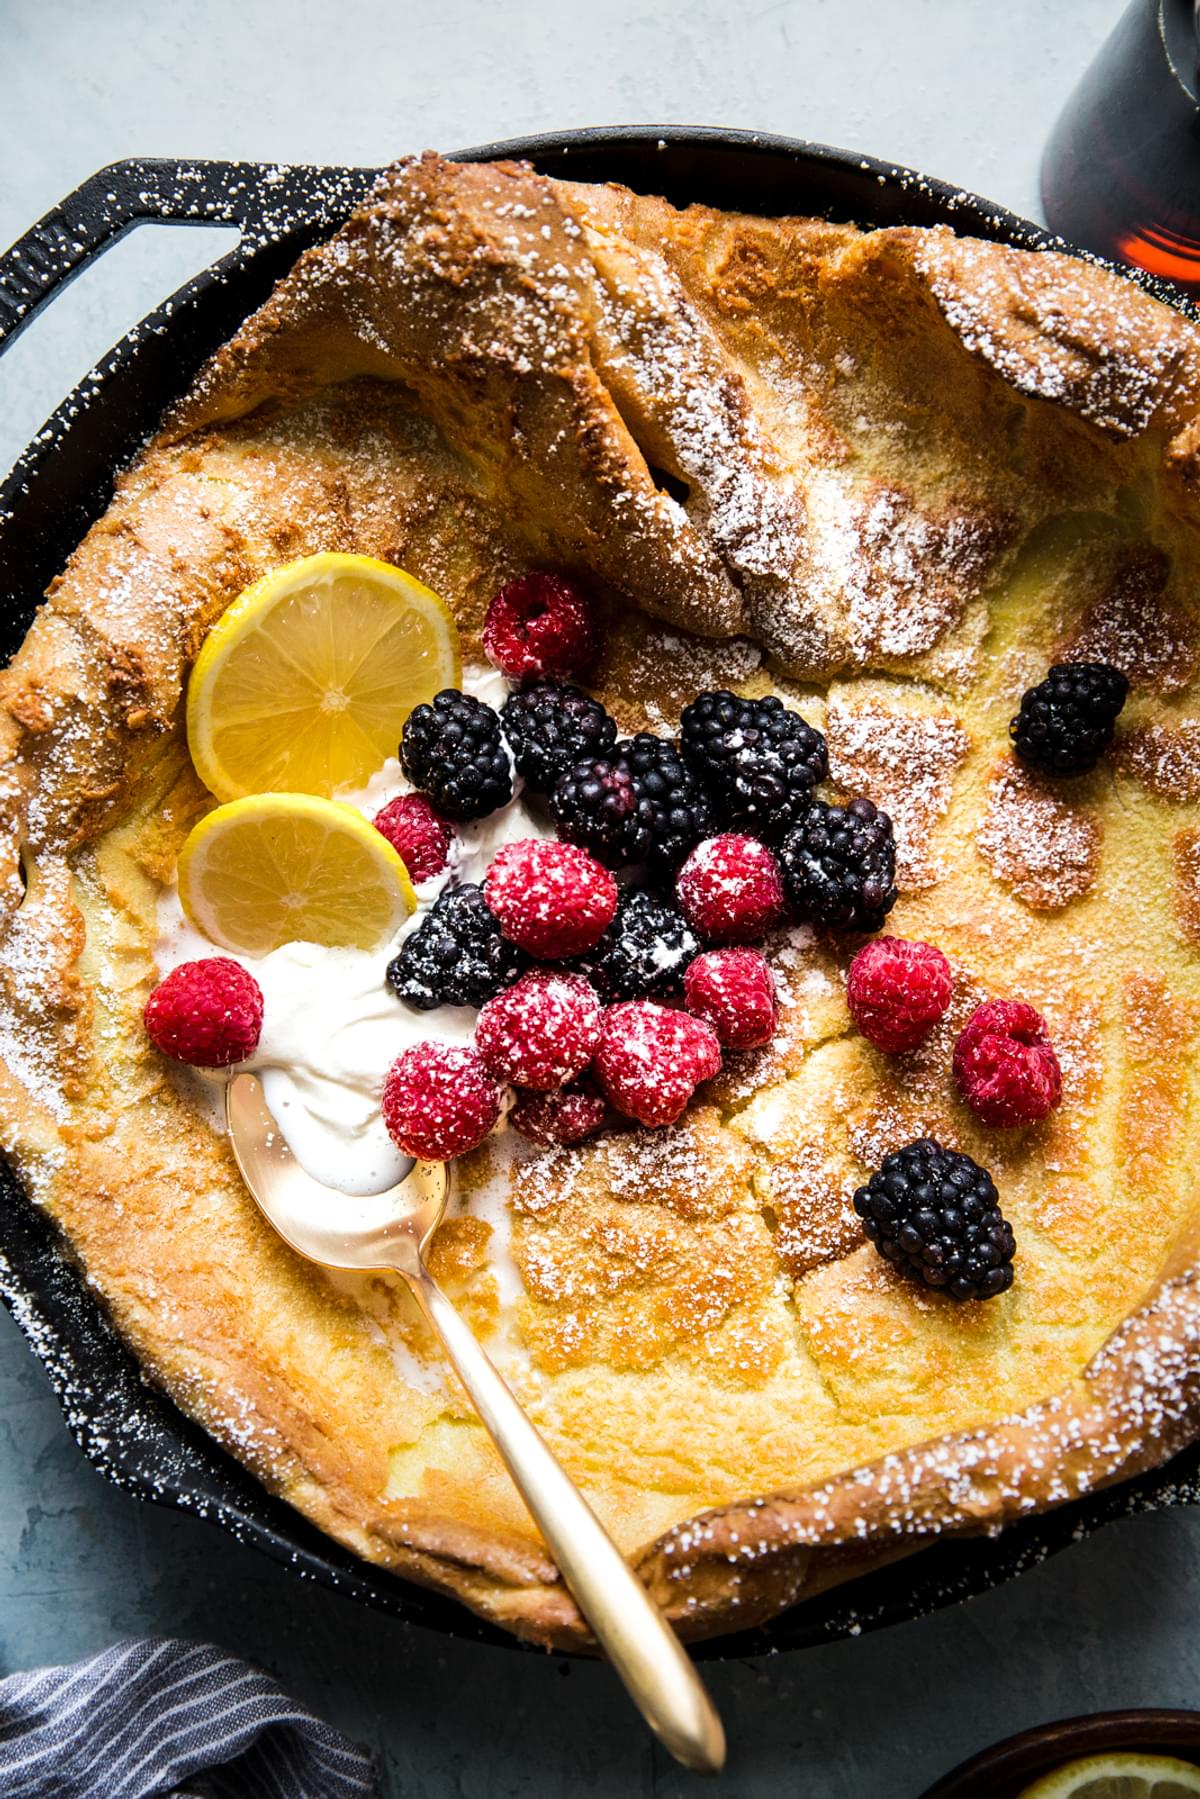 Homemade Dutch baby pancake  in a cast iron skillet topped with whipped cream, powdered sugar, berries and lemon